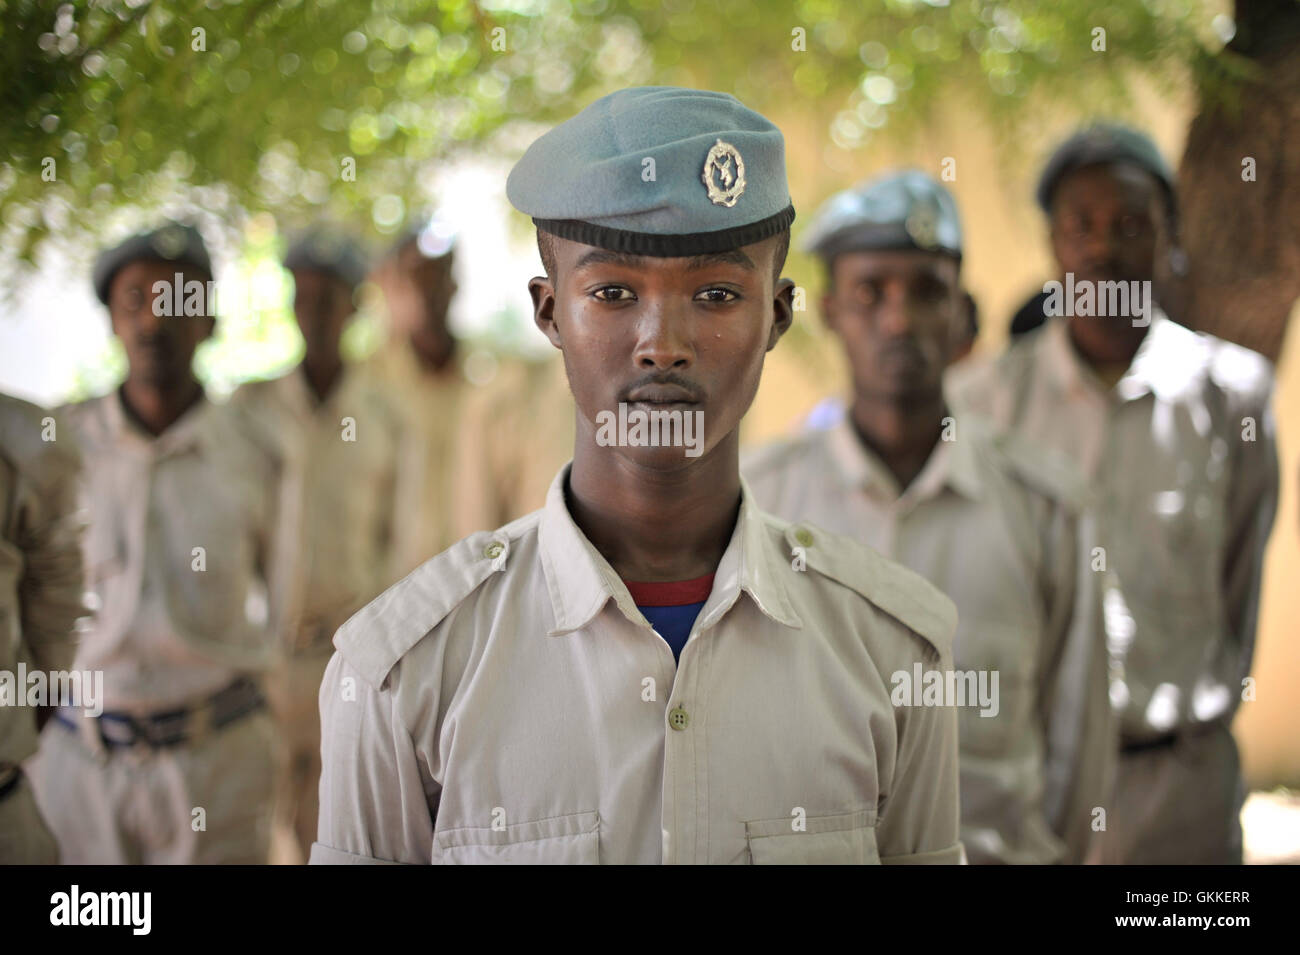 Police officers at General Kahiye Police Academy in Mogadishu, Somalia,  watch a training excercise conducted by the African Union on June 16. The  African Union is currently training one hundred Somali Police